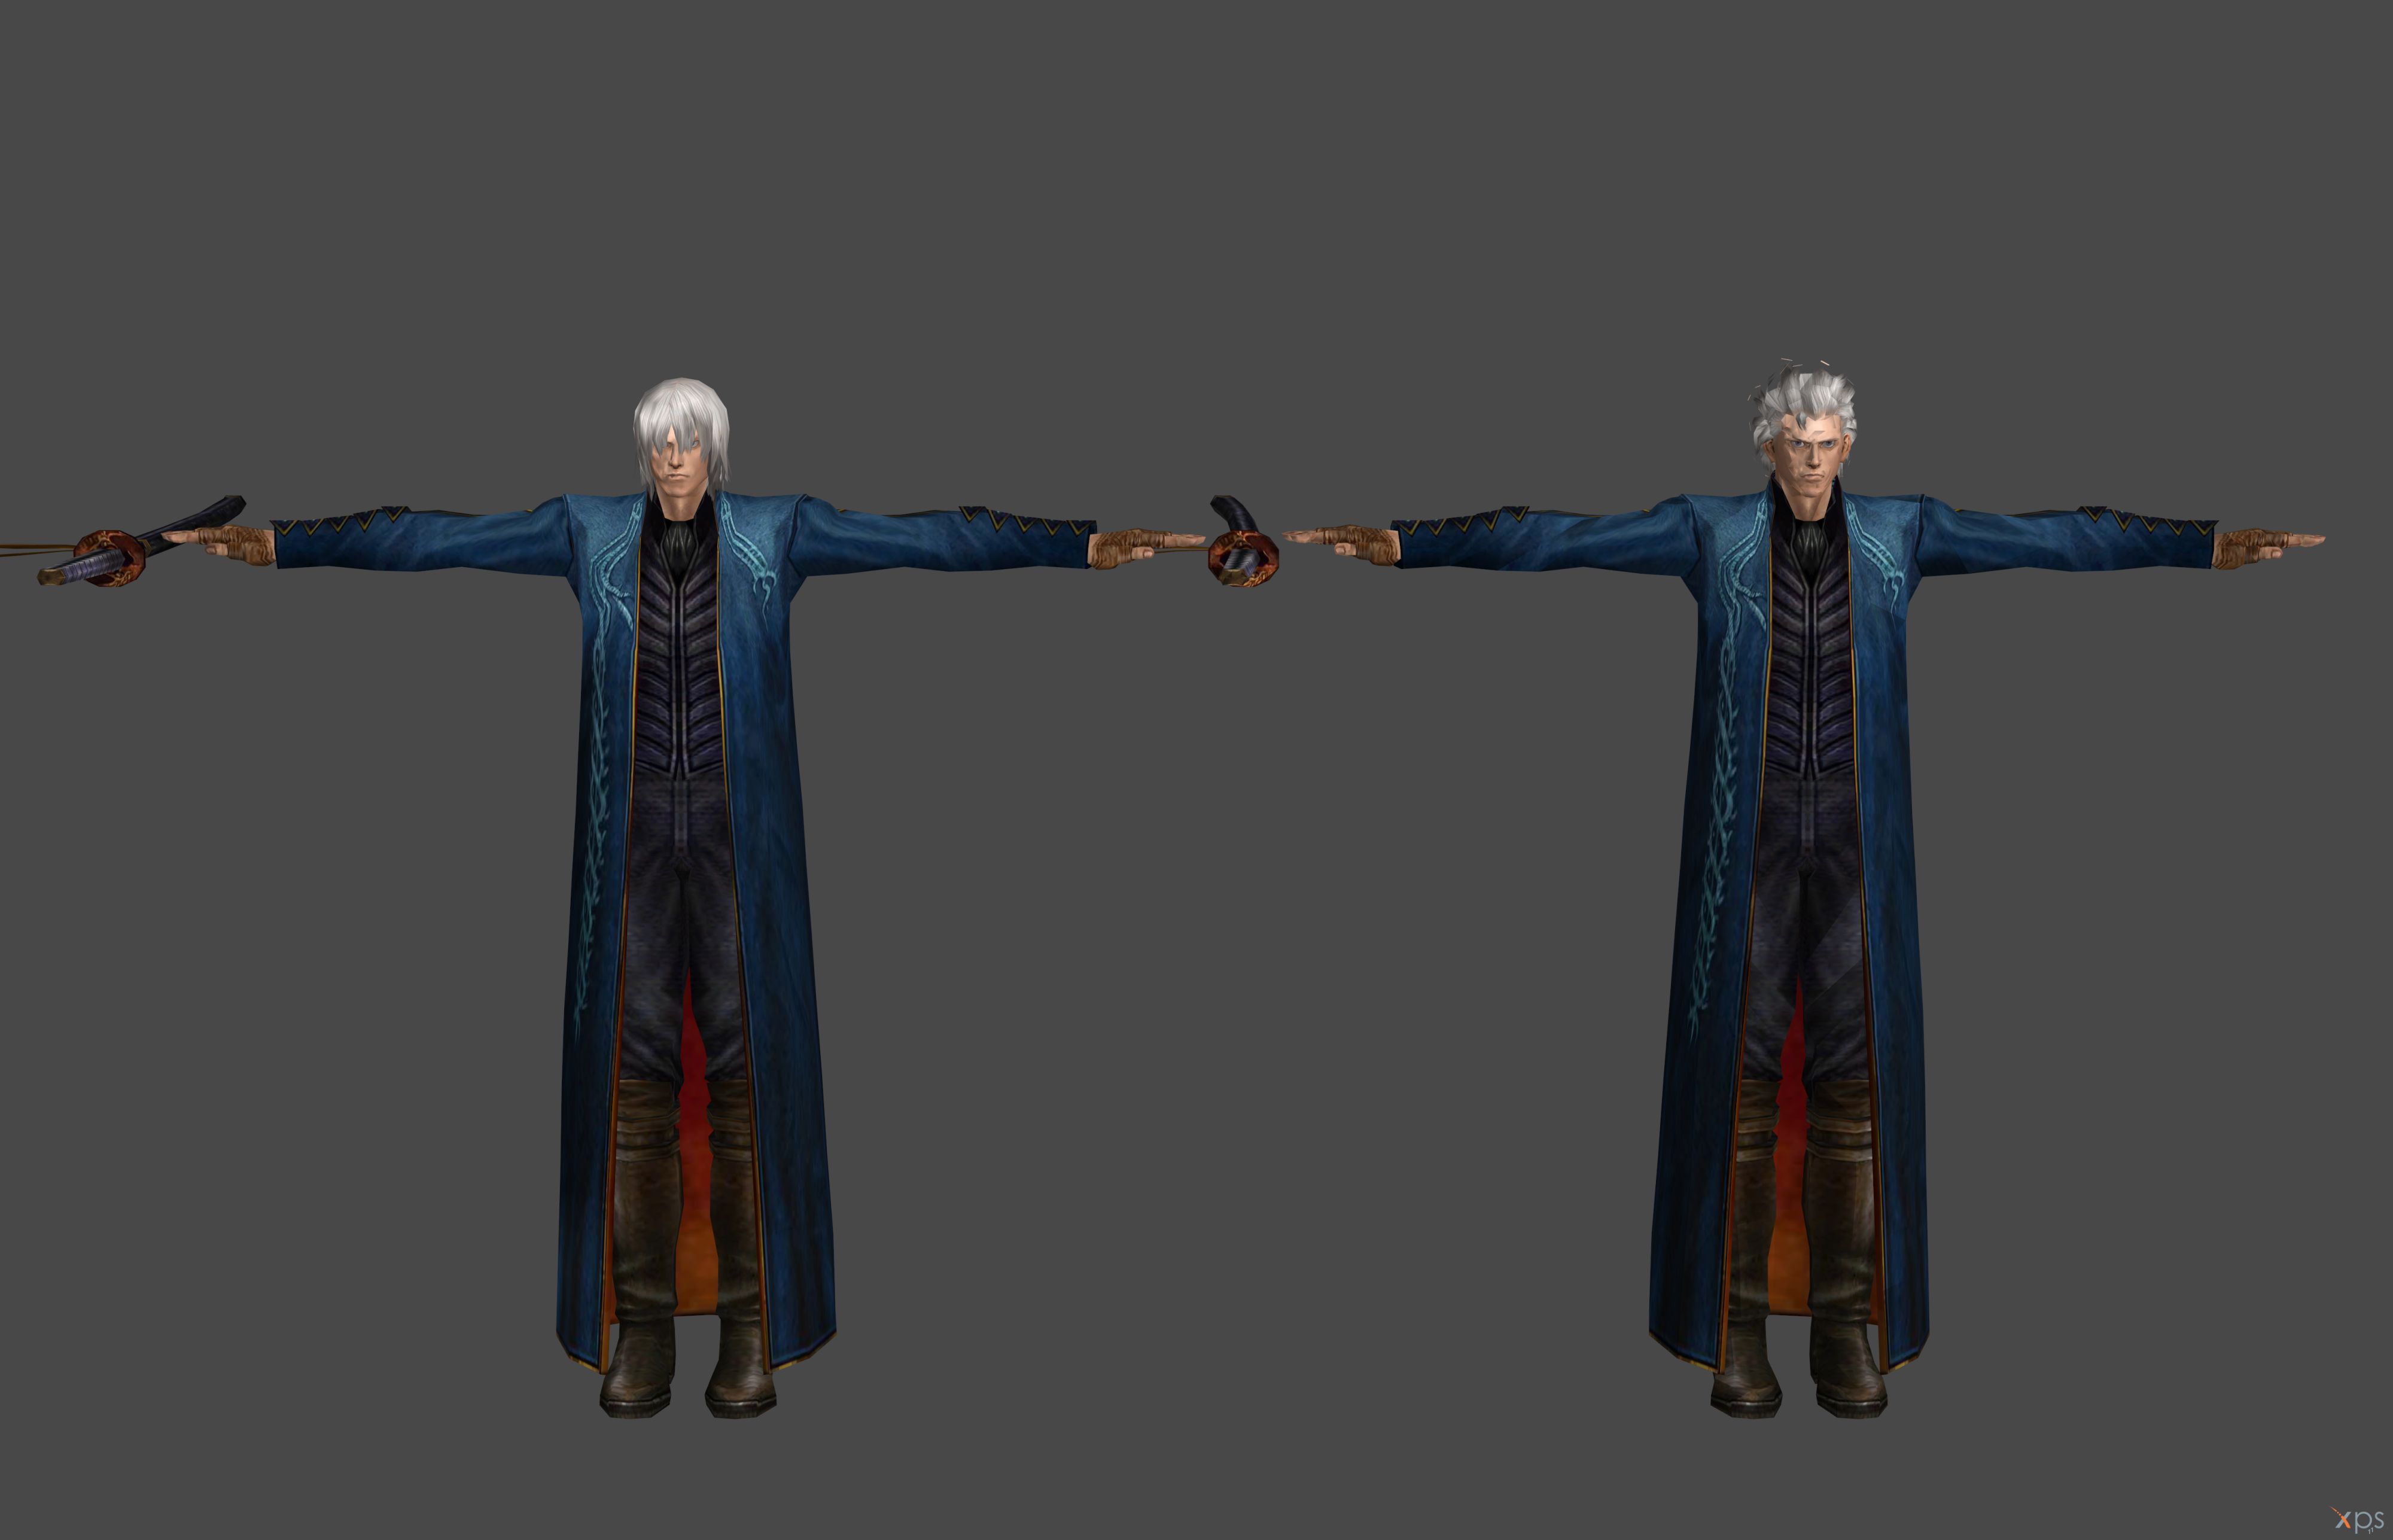 Rawzy — Played through DMC3 for Vergil then decided to